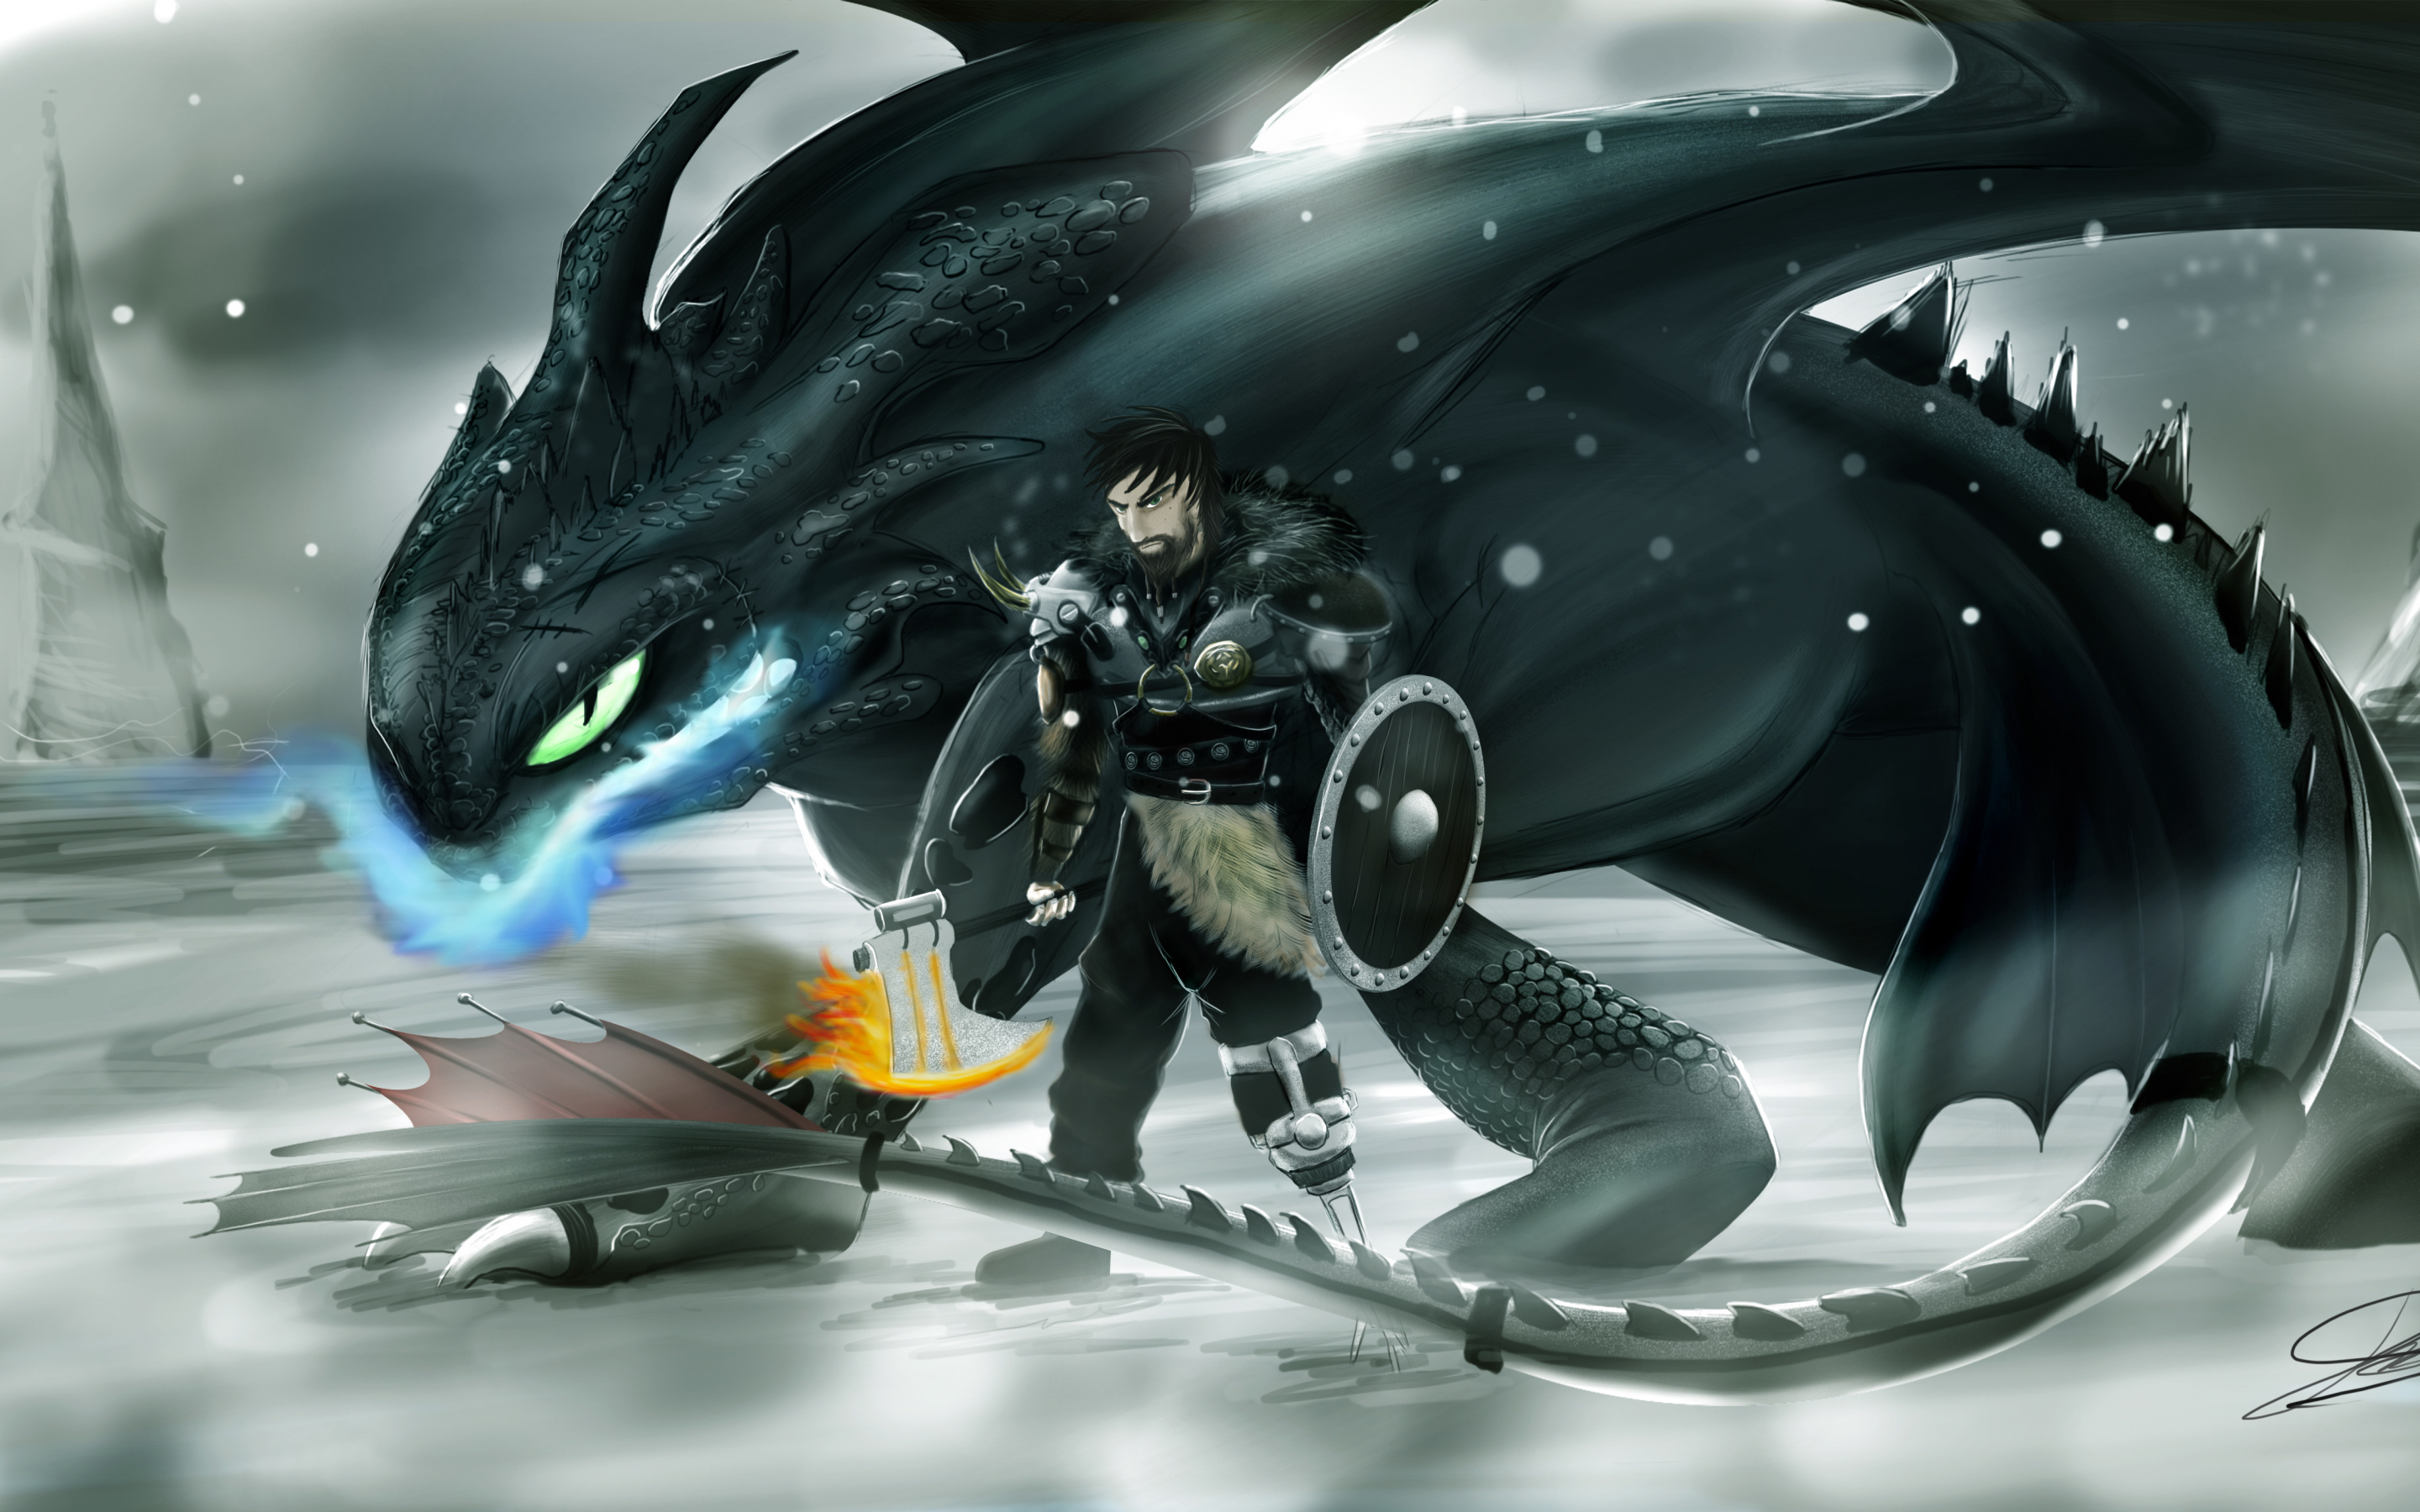 Dragon, hiccup, How to Train Your Dragon, warrior, art, 2880x1800 wallpaper